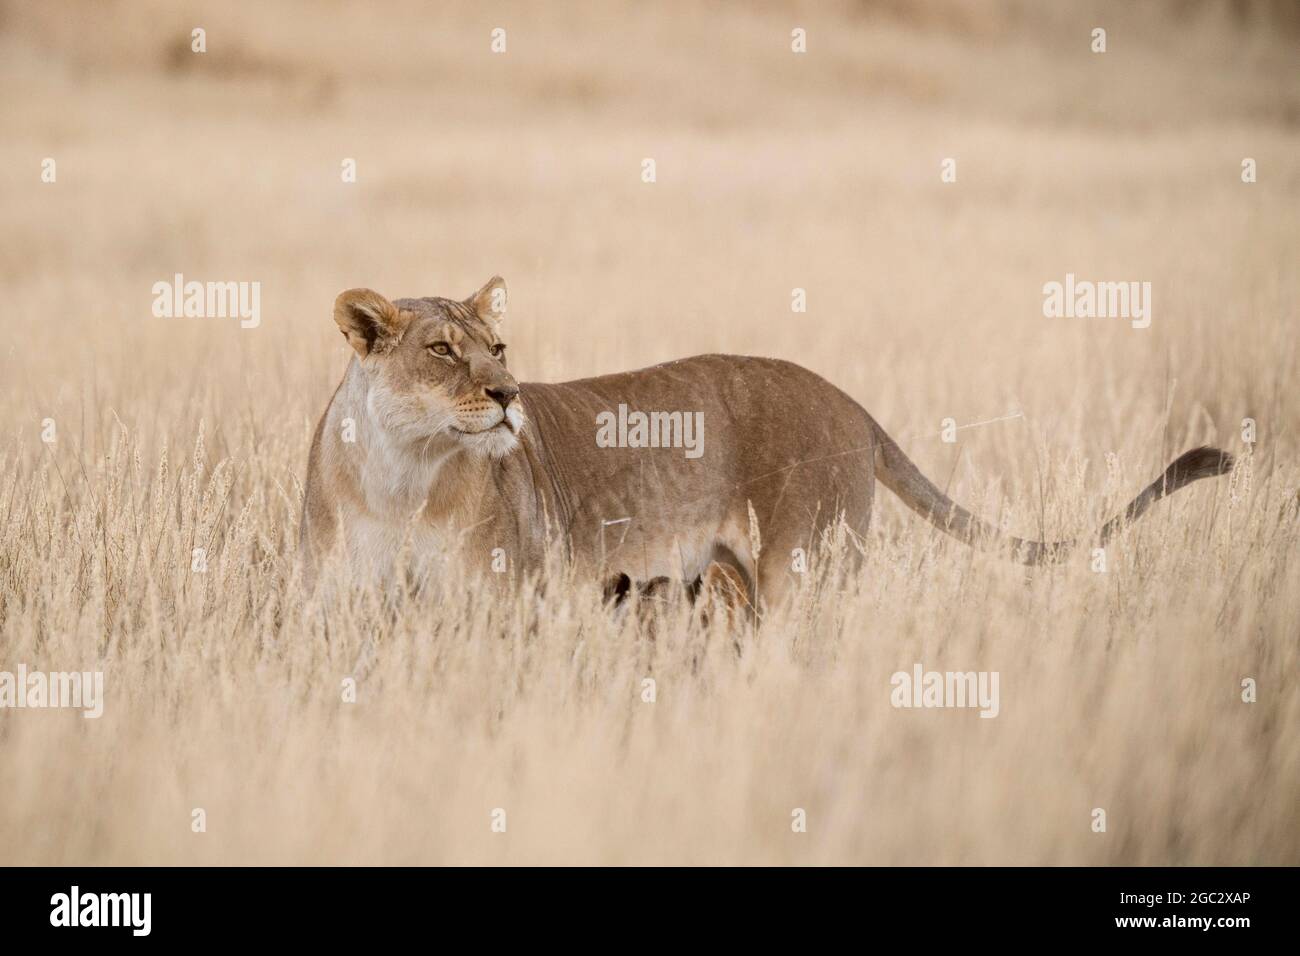 Lion in grass, Panthera leo, Kgalagadi Transfrontier Park, South Africa Stock Photo